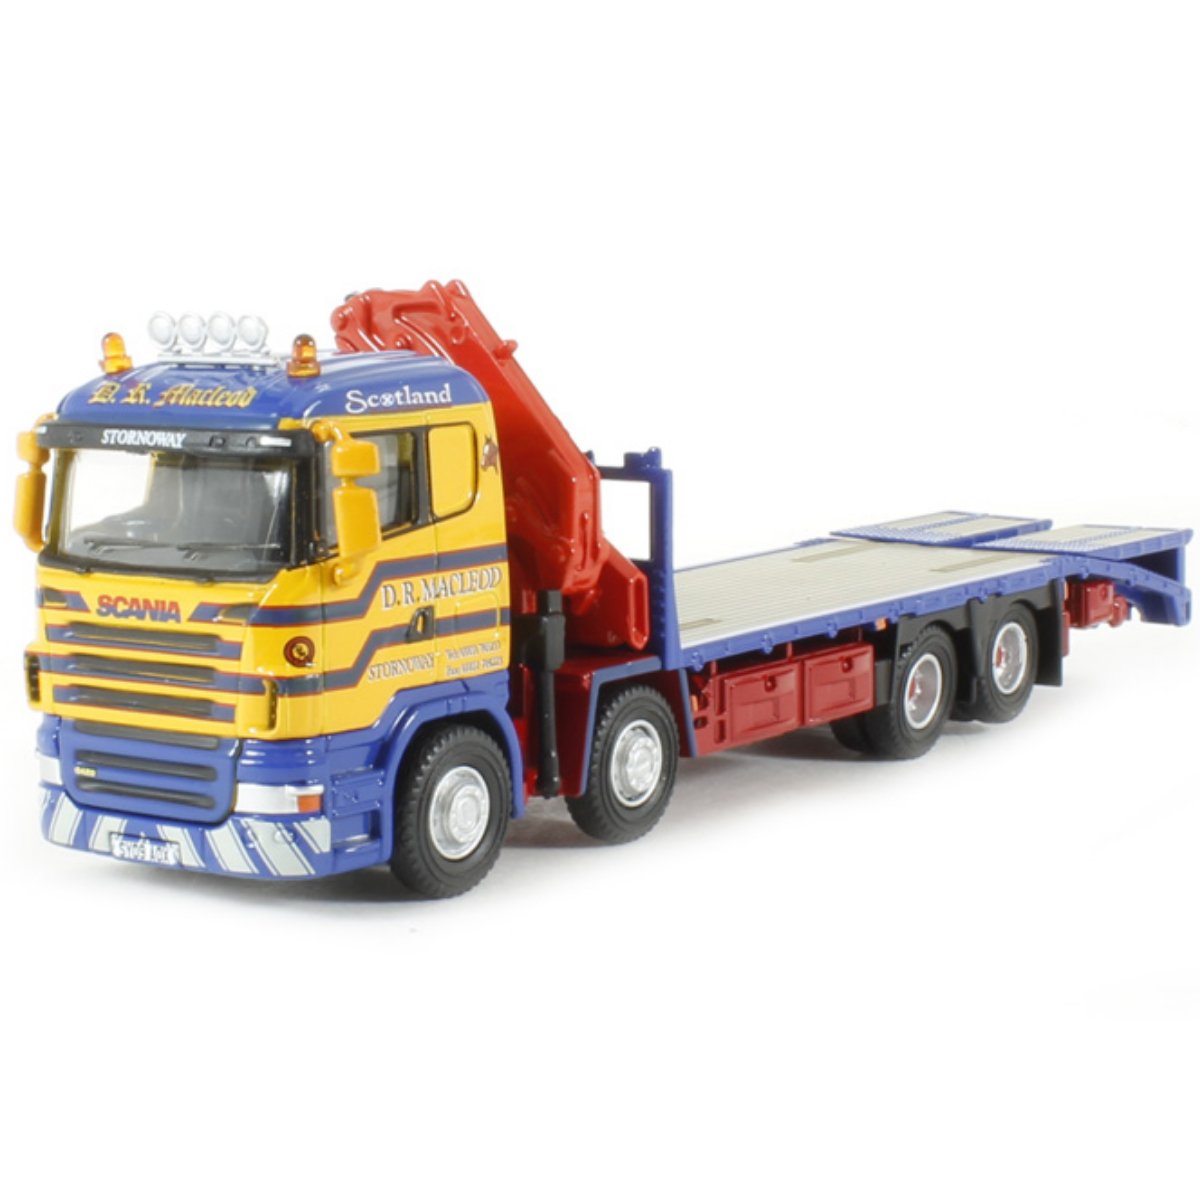 Oxford Diecast 76SCL001 Scania Crane Lorry D R Macleod - Phillips Hobbies